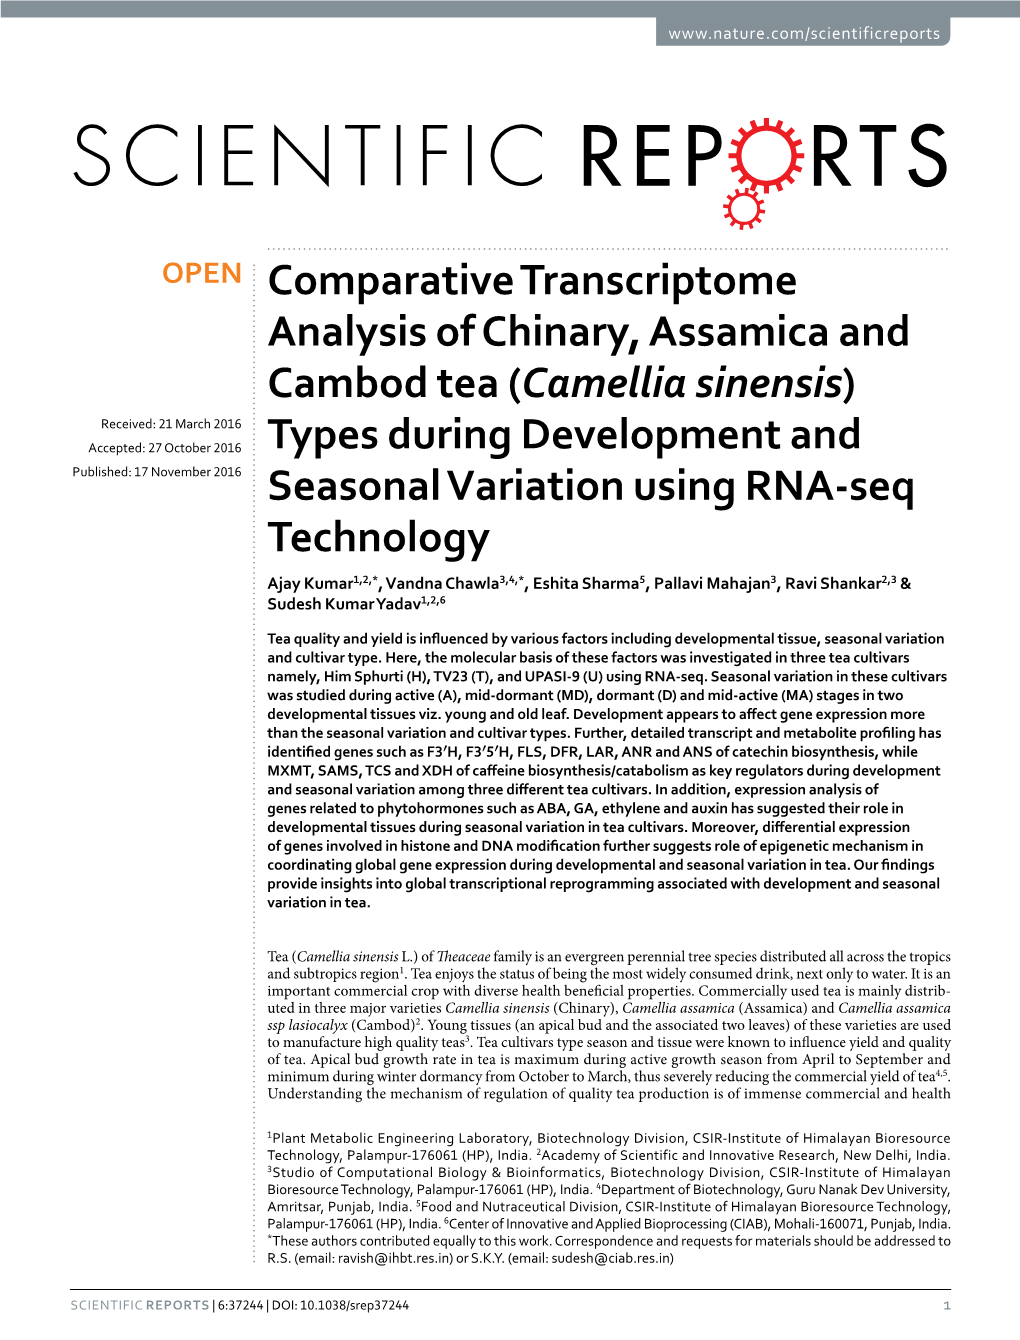 Comparative Transcriptome Analysis of Chinary, Assamica and Cambod